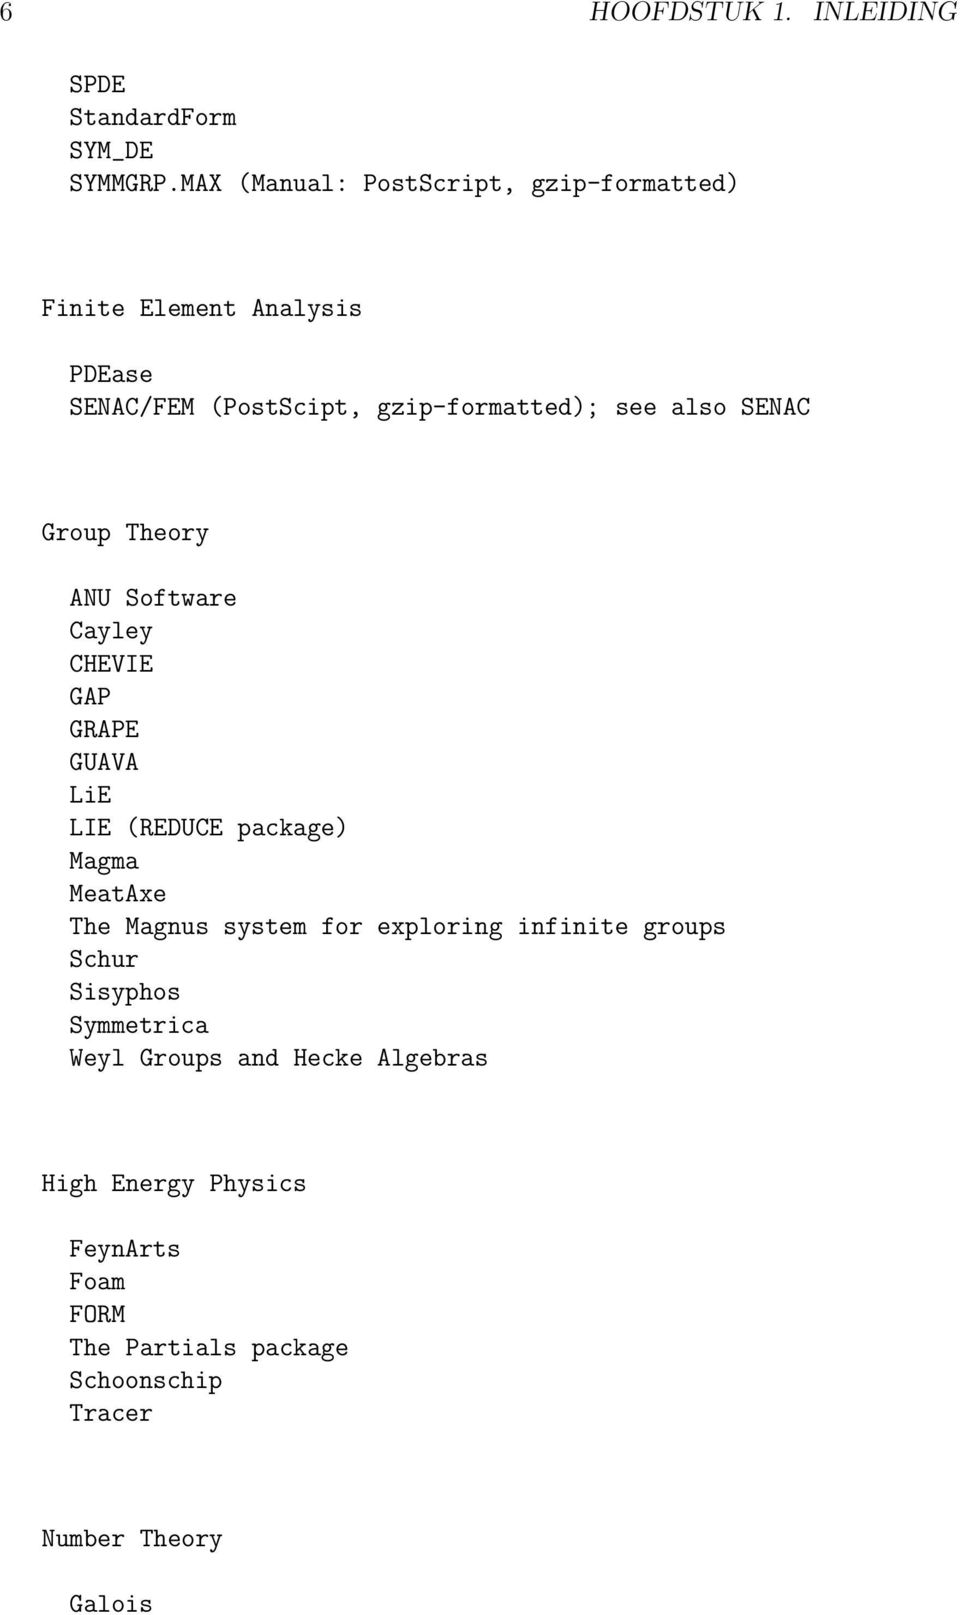 SENAC Group Theory ANU Software Cayley CHEVIE GAP GRAPE GUAVA LiE LIE (REDUCE package) Magma MeatAxe The Magnus system